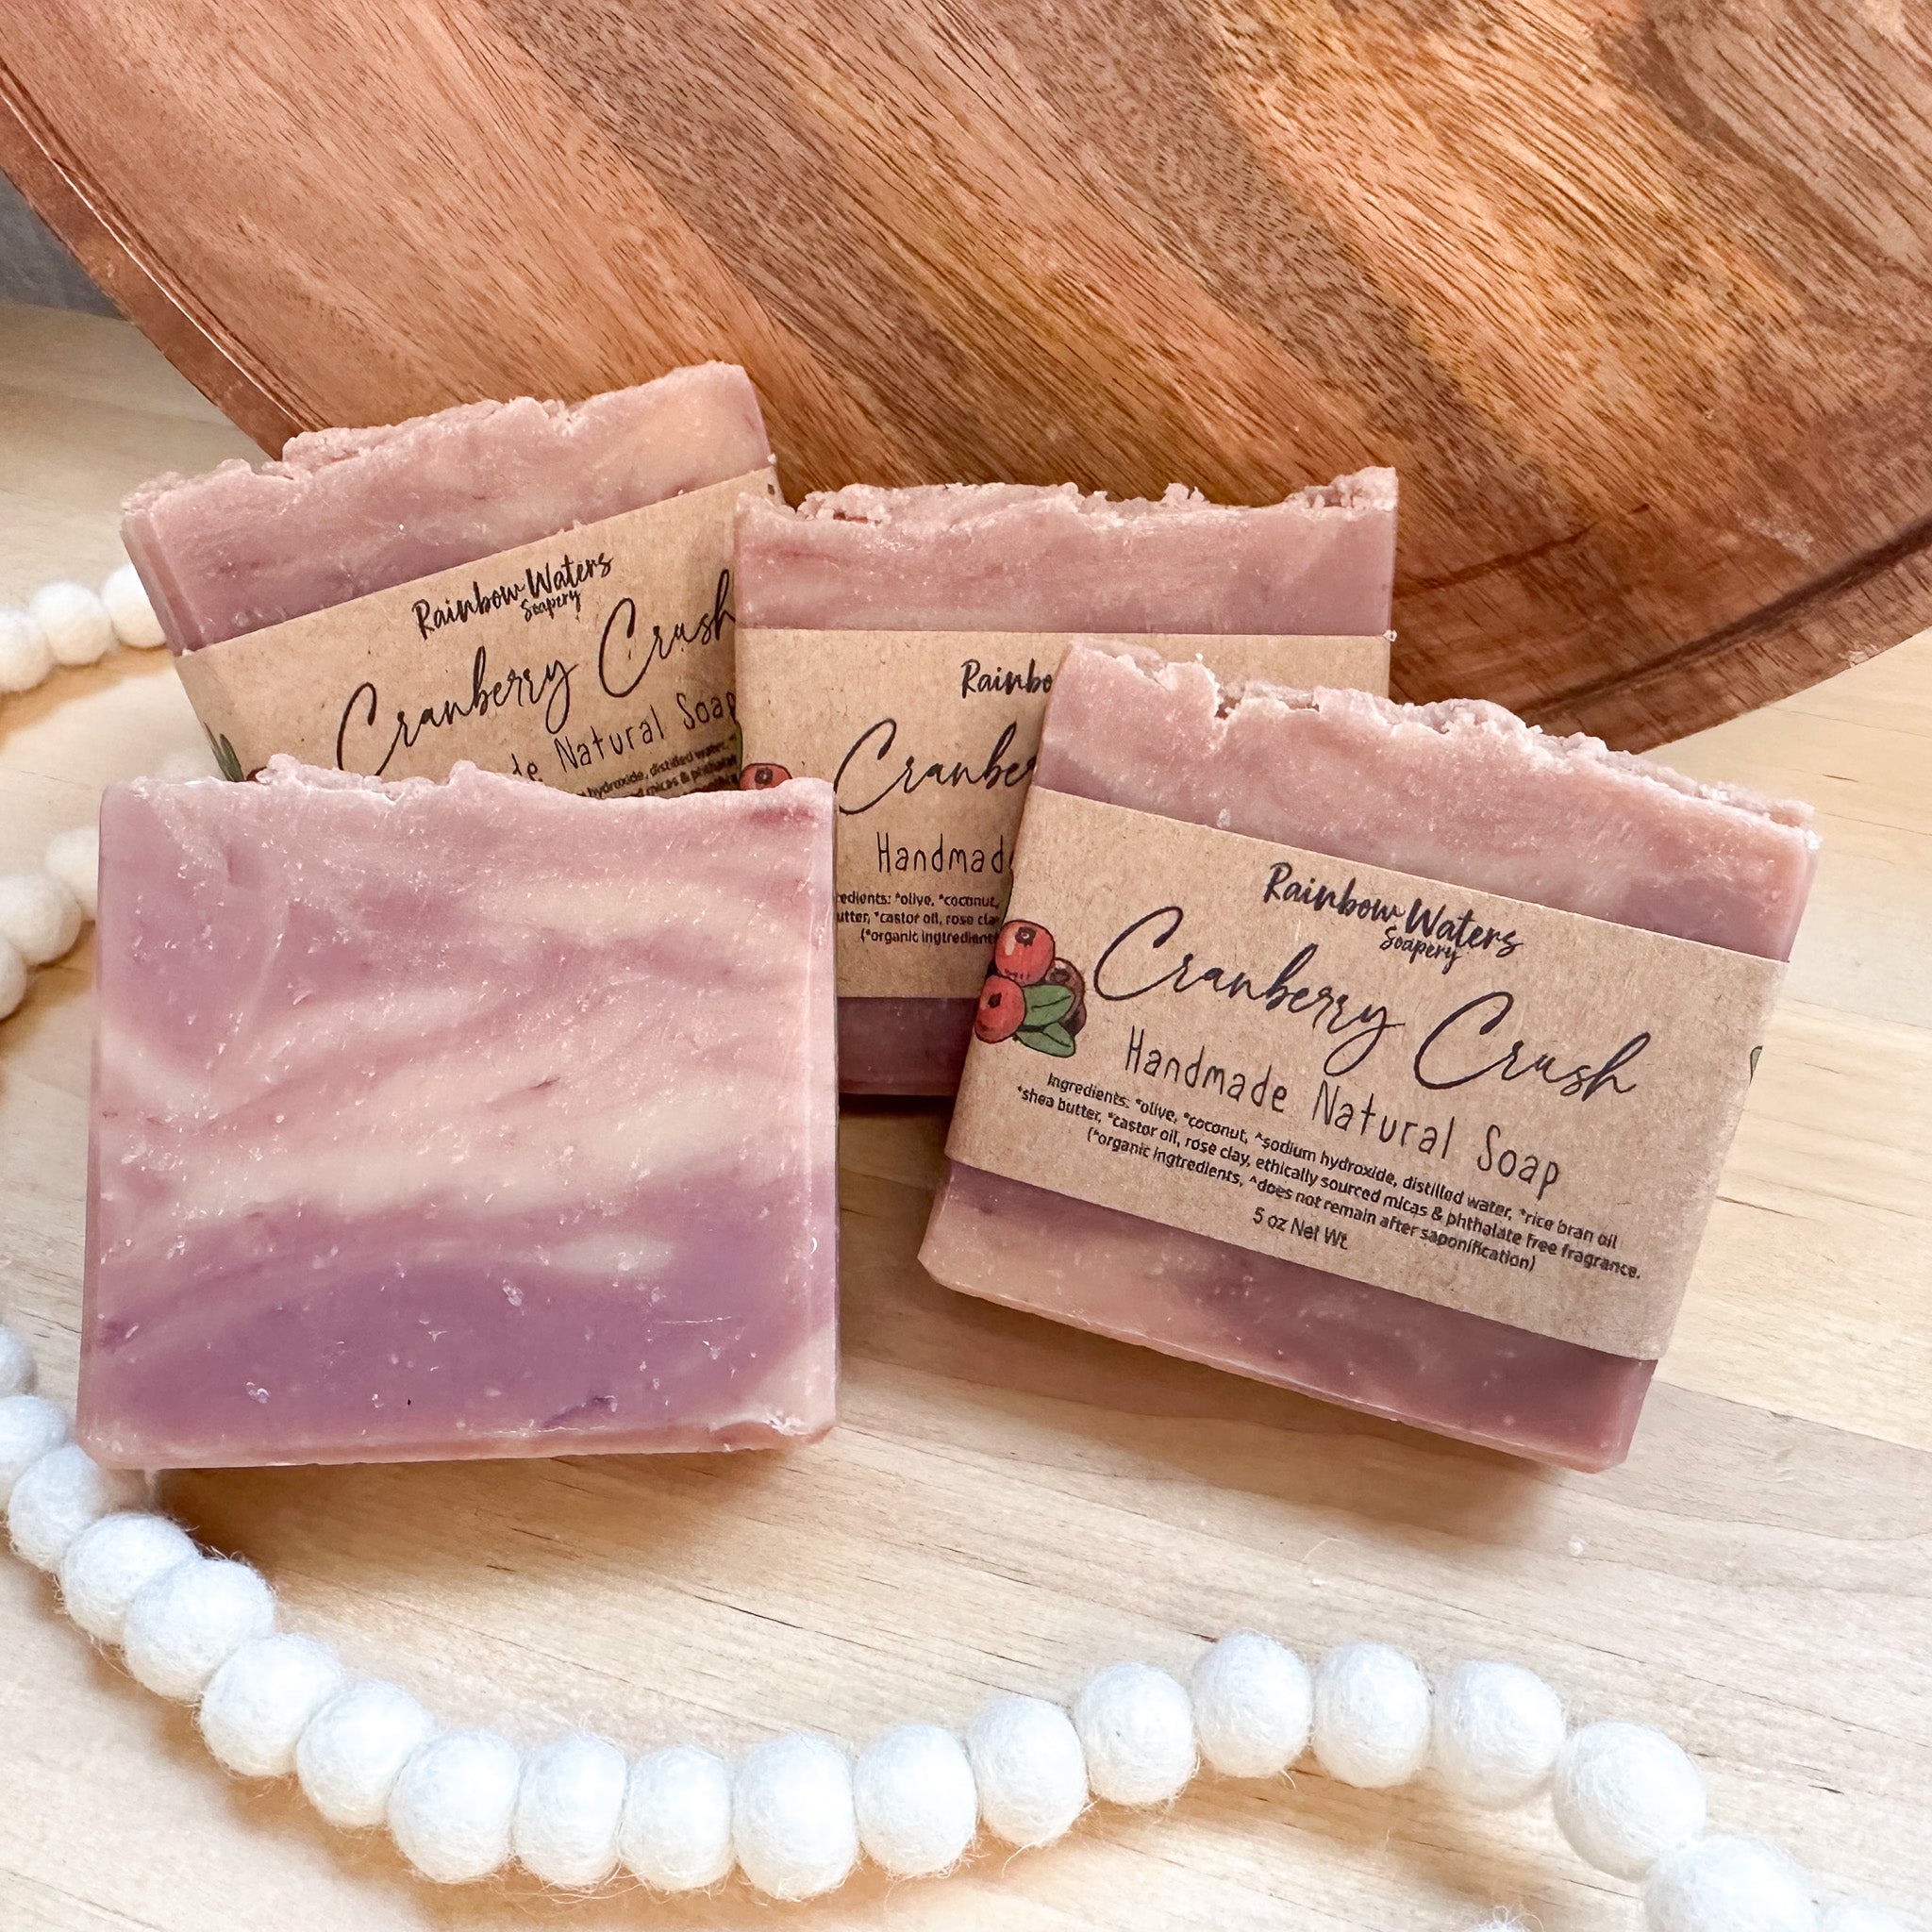 Cranberry Crush | Handcrafted Hand & Body Soap Bar | Winter Collection